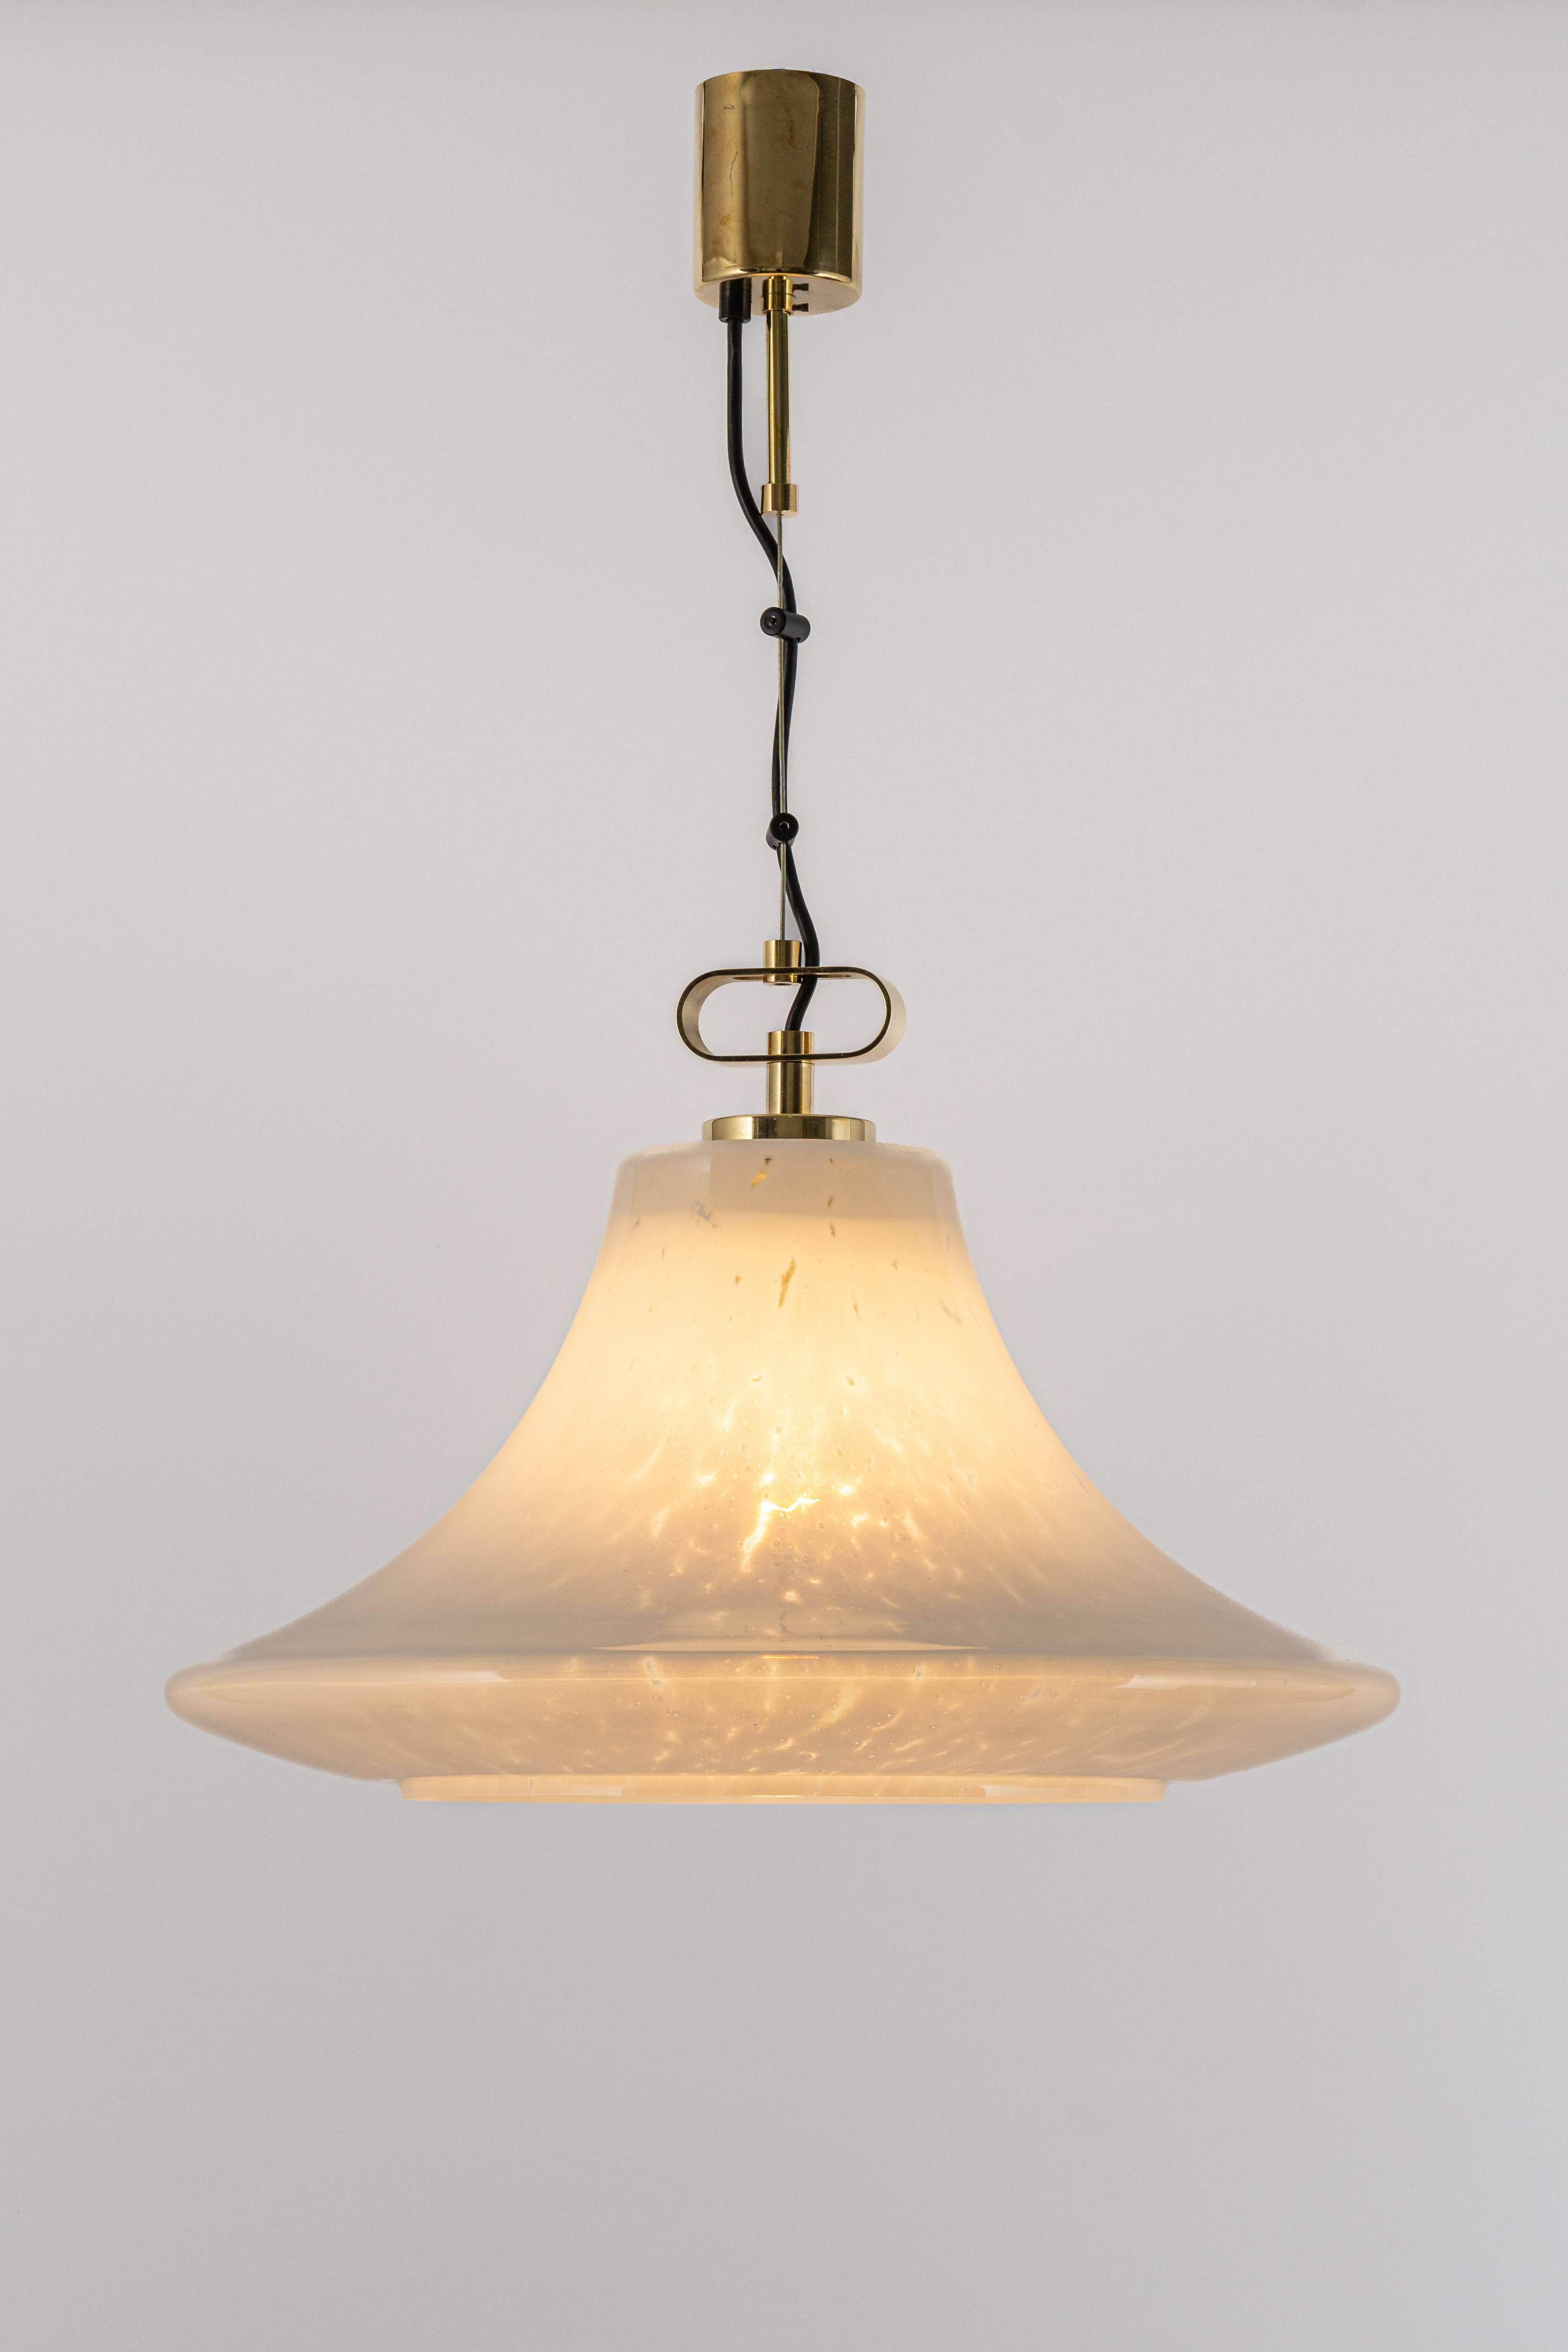 Large Limburg Brass with Opal Glass Pendant Light, Germany, 1970s For Sale 1